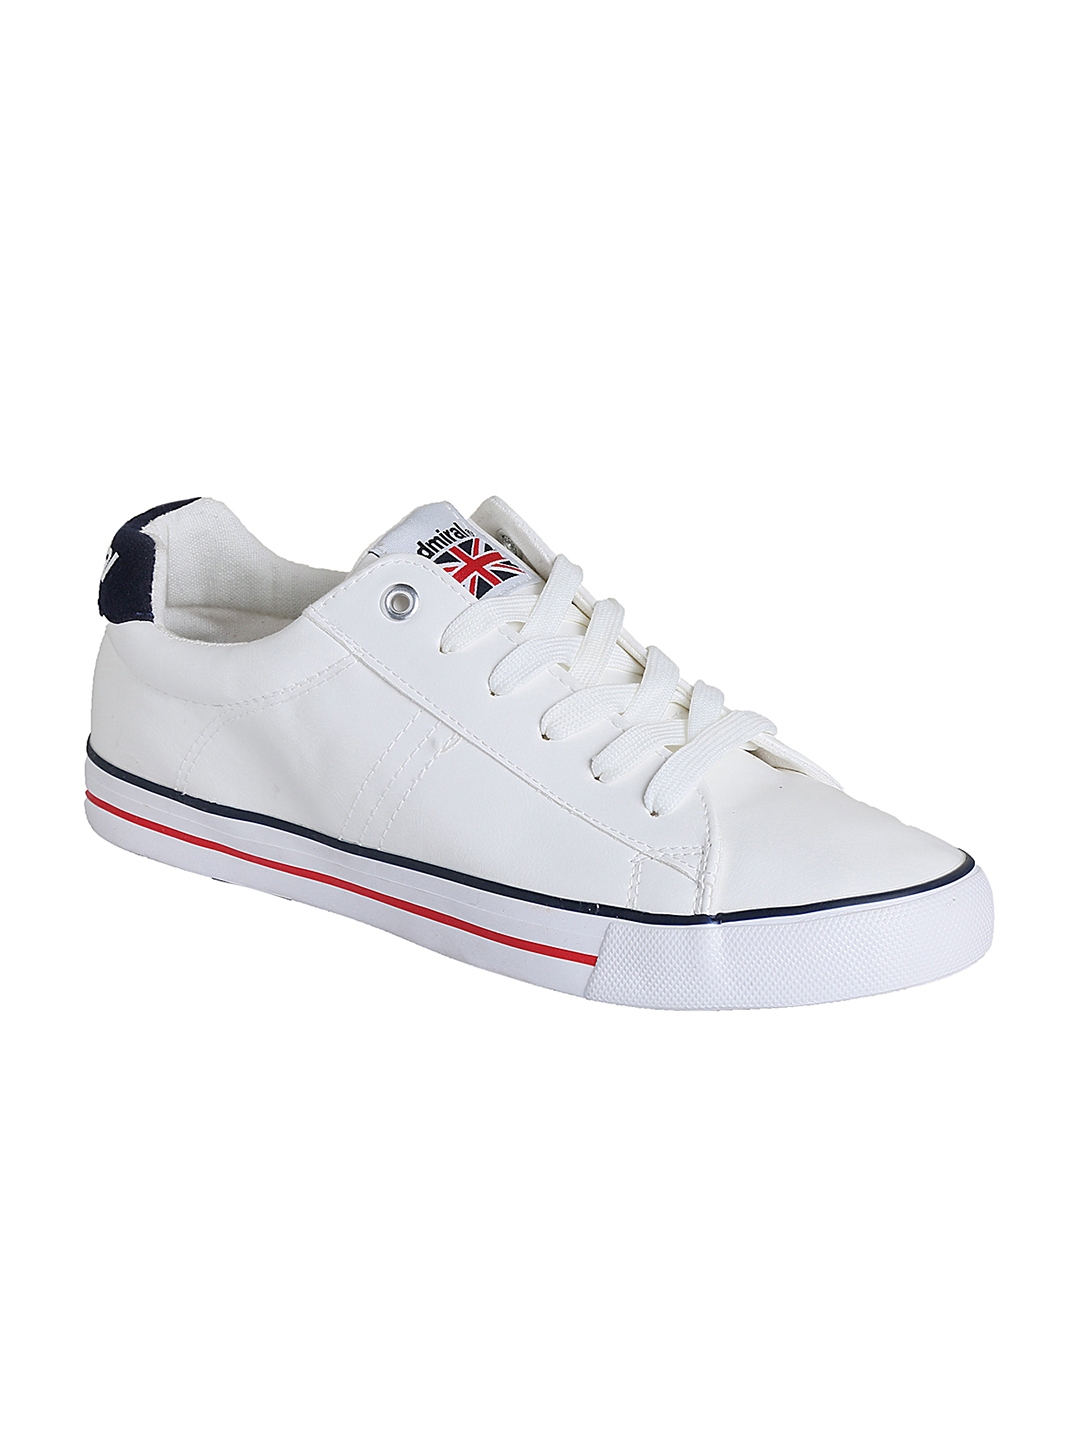 Buy Admiral Women White Sneakers - Casual Shoes for Women 1924074 | Myntra